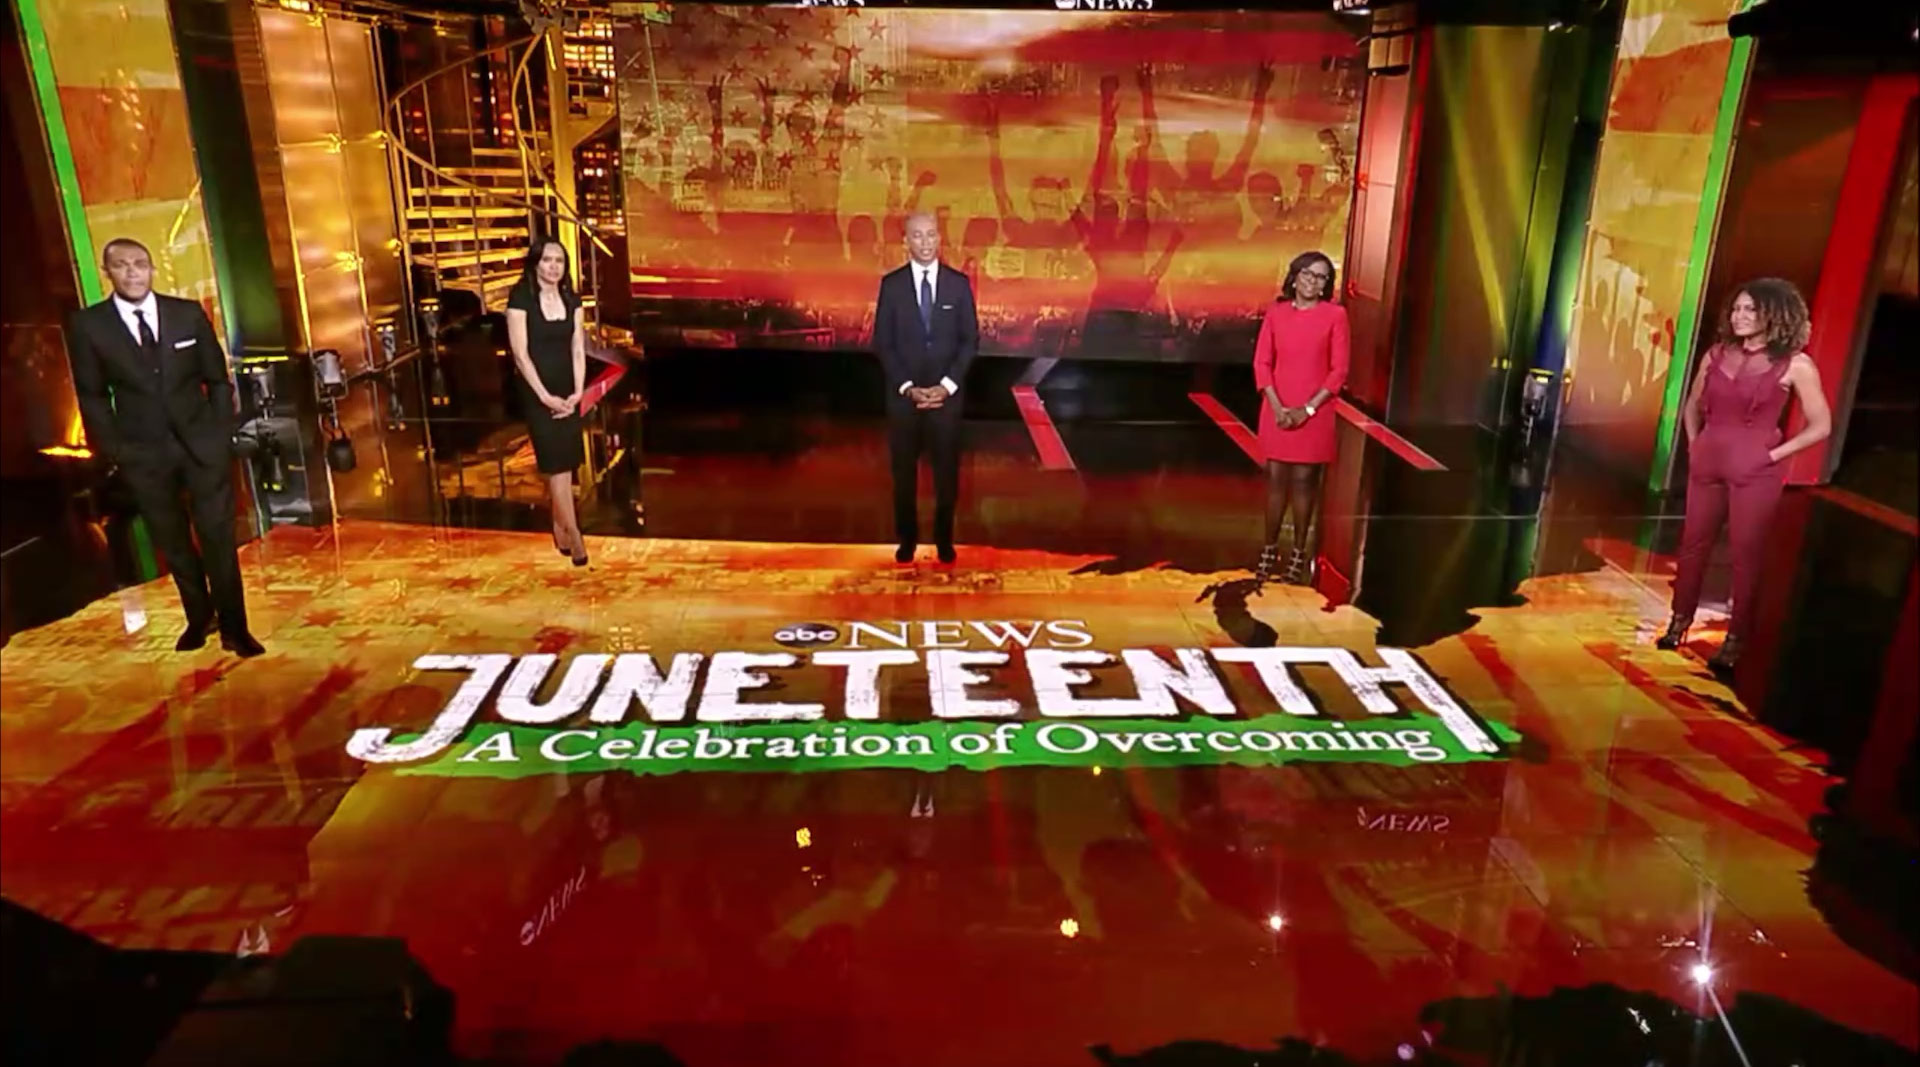 Screen design for Juneteenth live news special on ABC